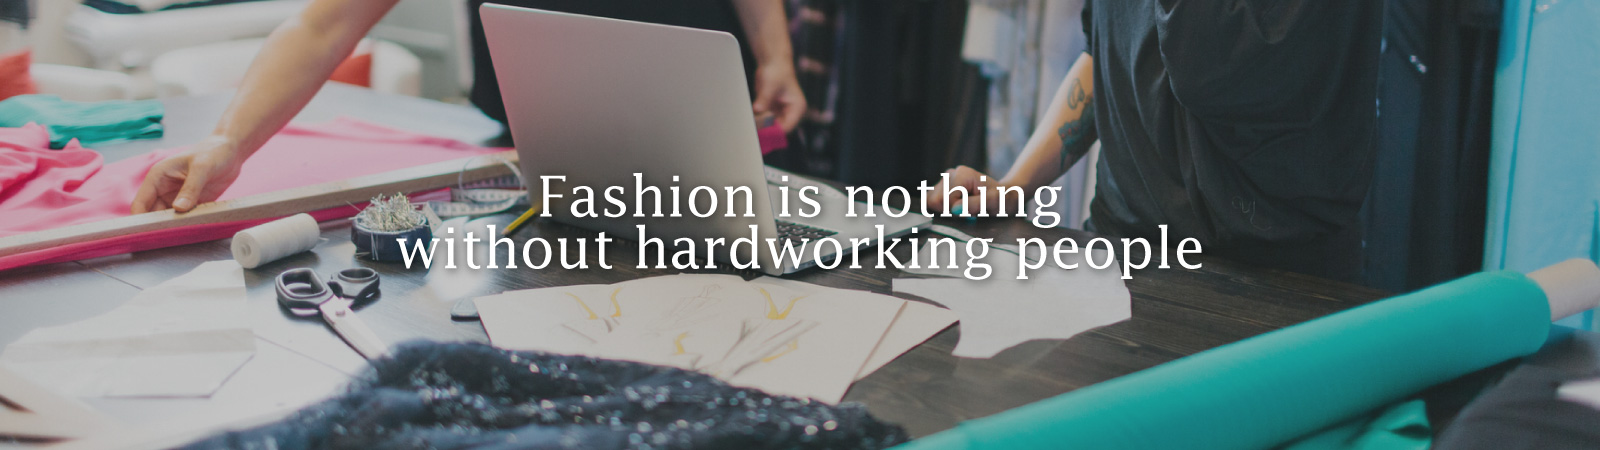 Fashion is nothing without hardworking people